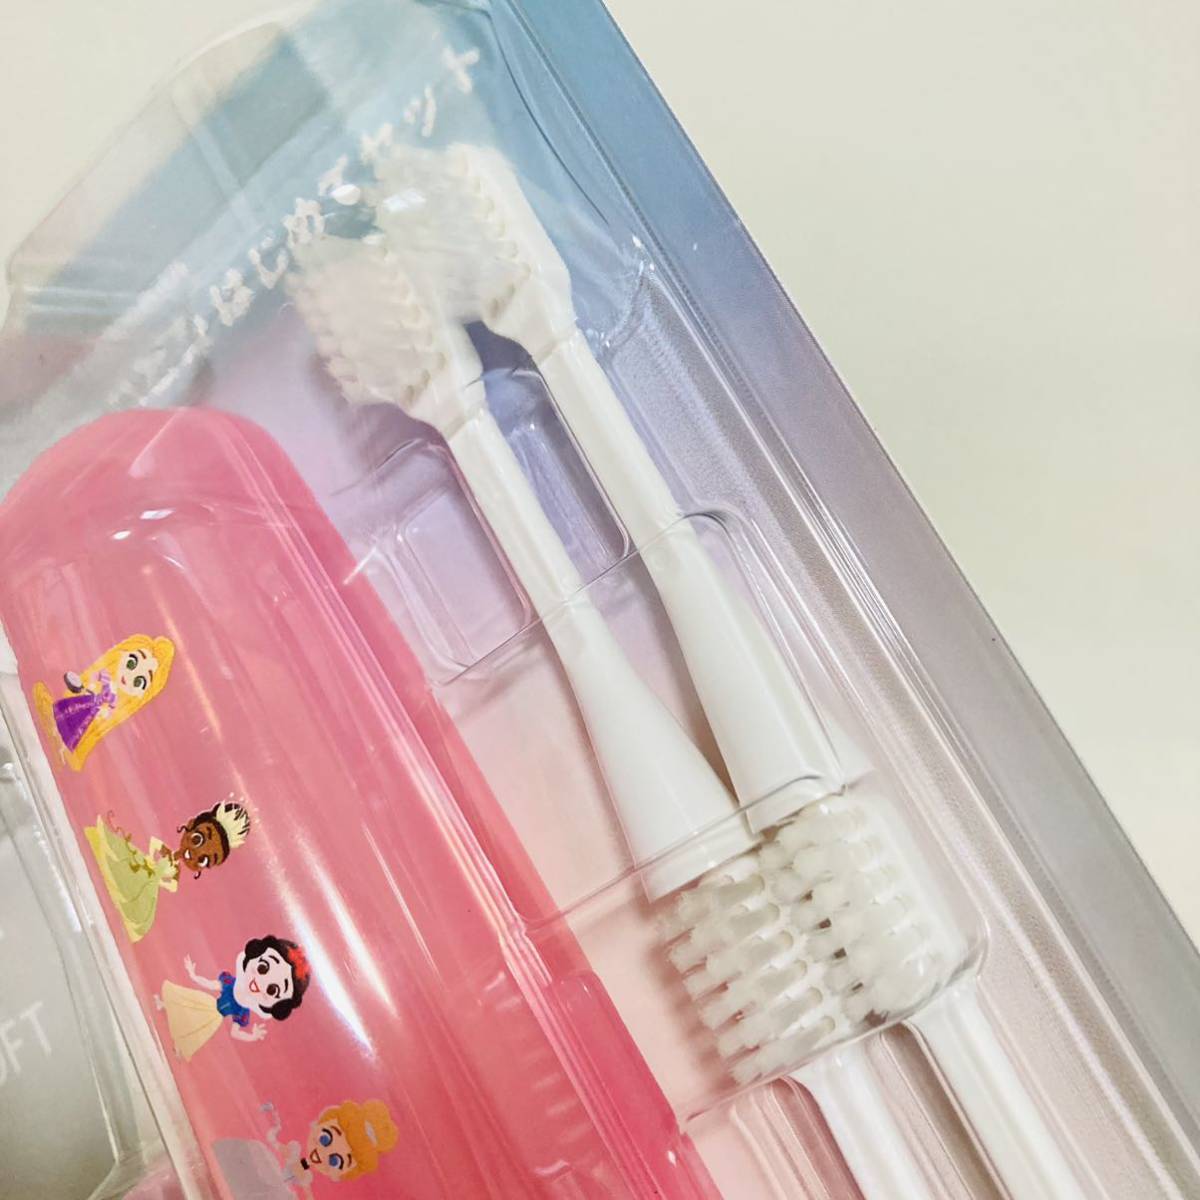 60. new goods free shipping girl toothbrush electric is ... Disney is brush is migaki brush teeth child 3 -years old 4 -years old 5 -years old 6 -years old 7 -years old 8 -years old 